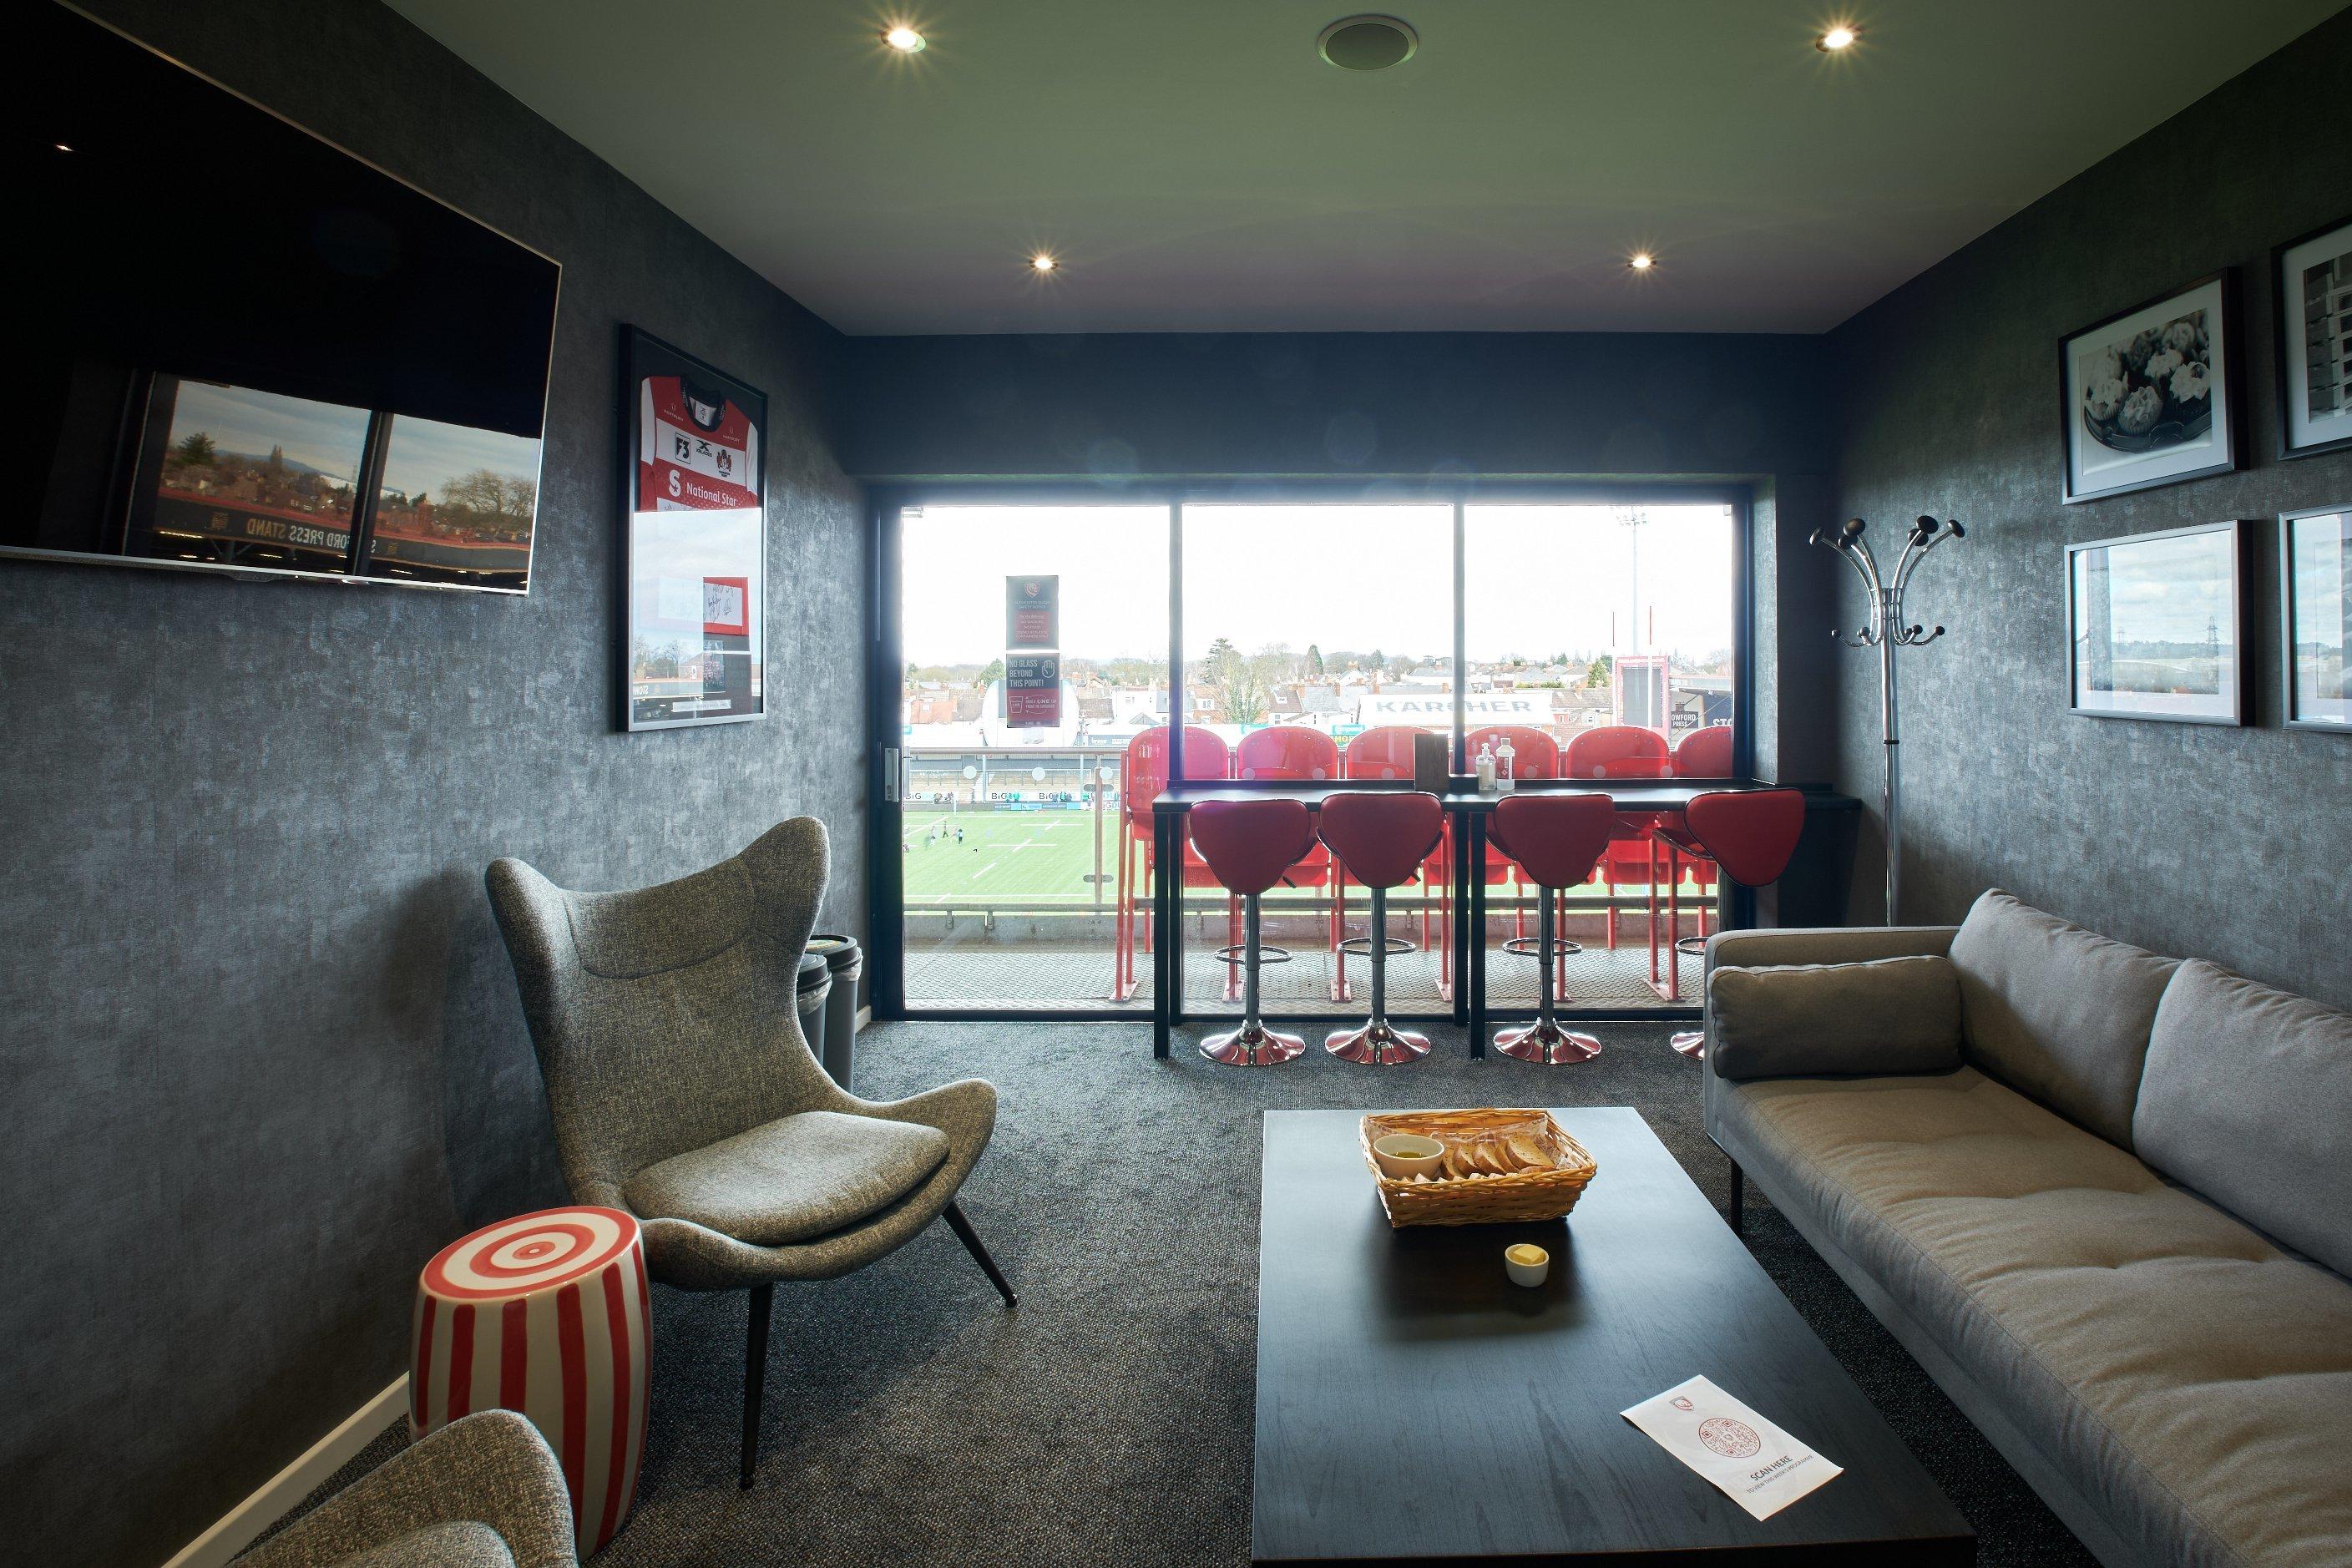 Gloucester Rugby Club: Kingsholm Stadium, Relaxed And Formal Meeting Rooms photo #1